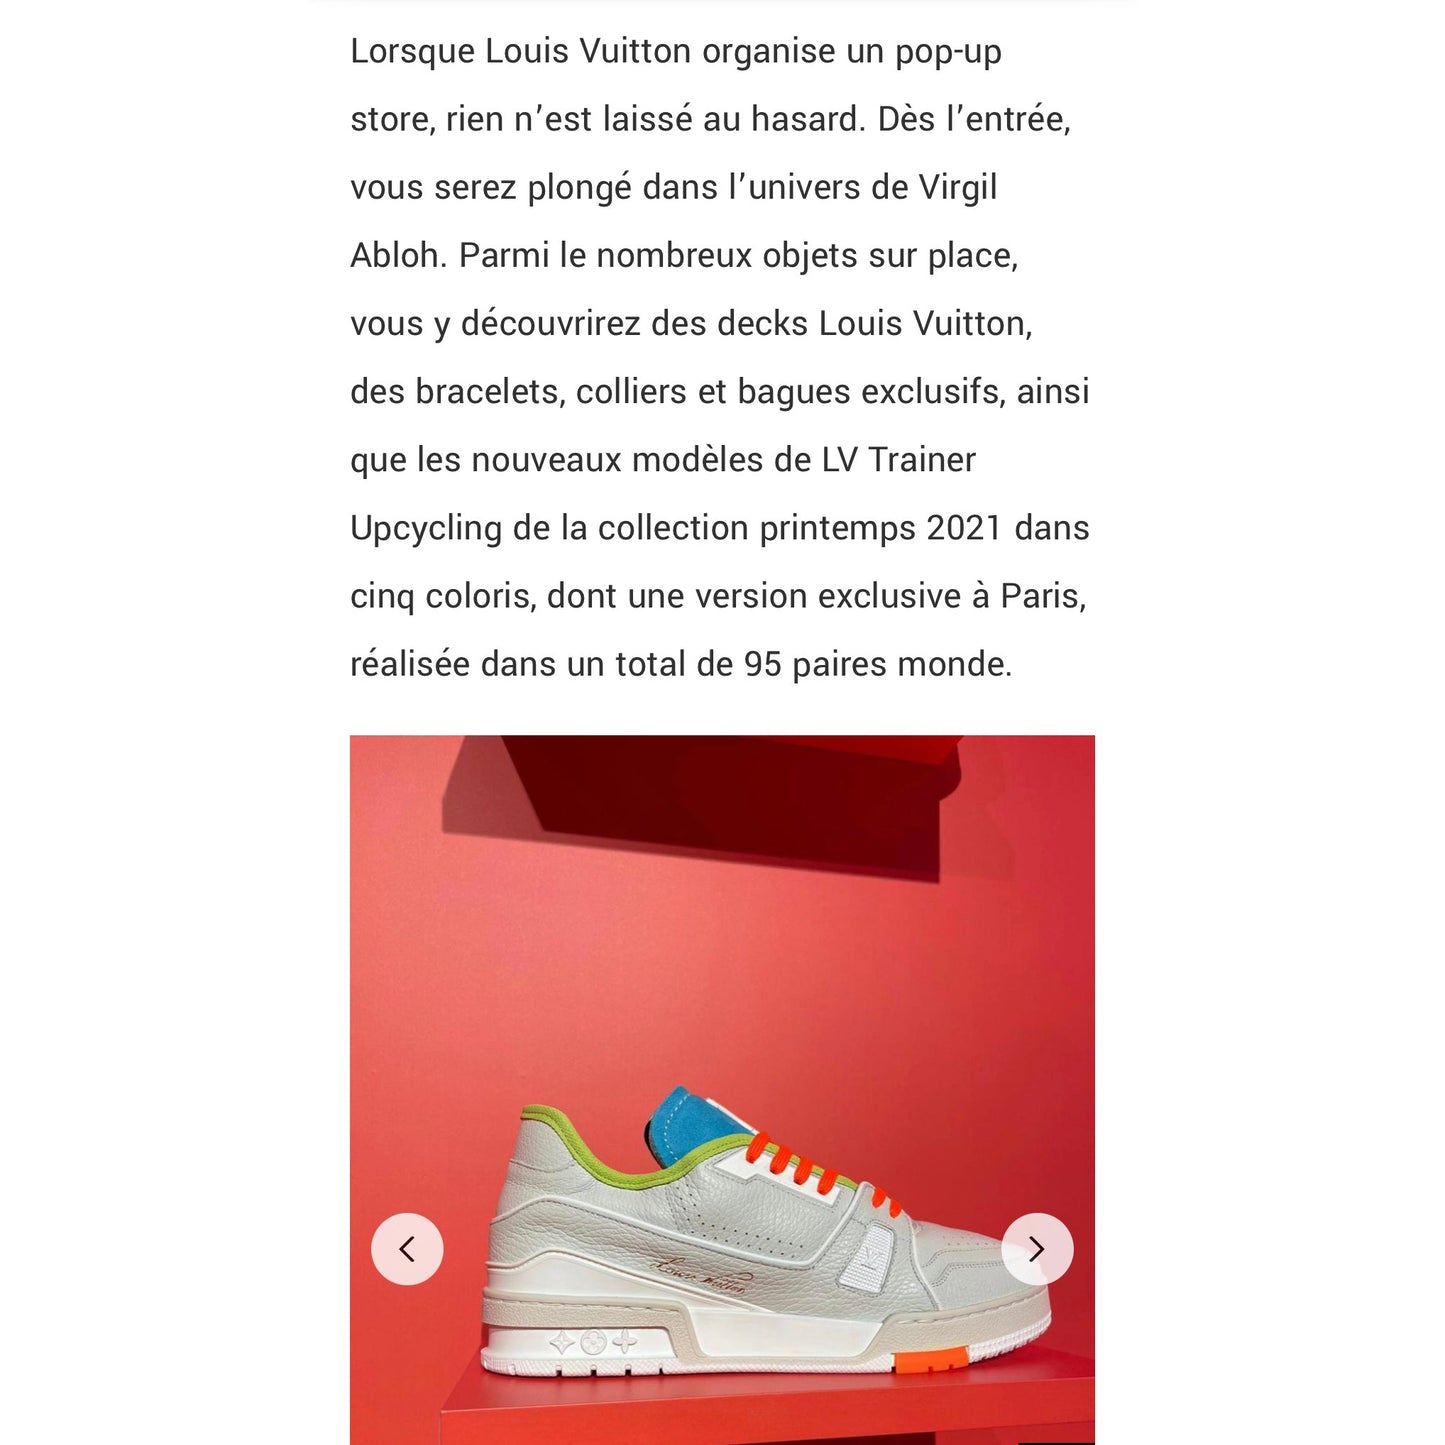 LOUIS VUITTON Sneaker Upcycling Virgil Abloh Special Edition city of Paris 95 ex in the world